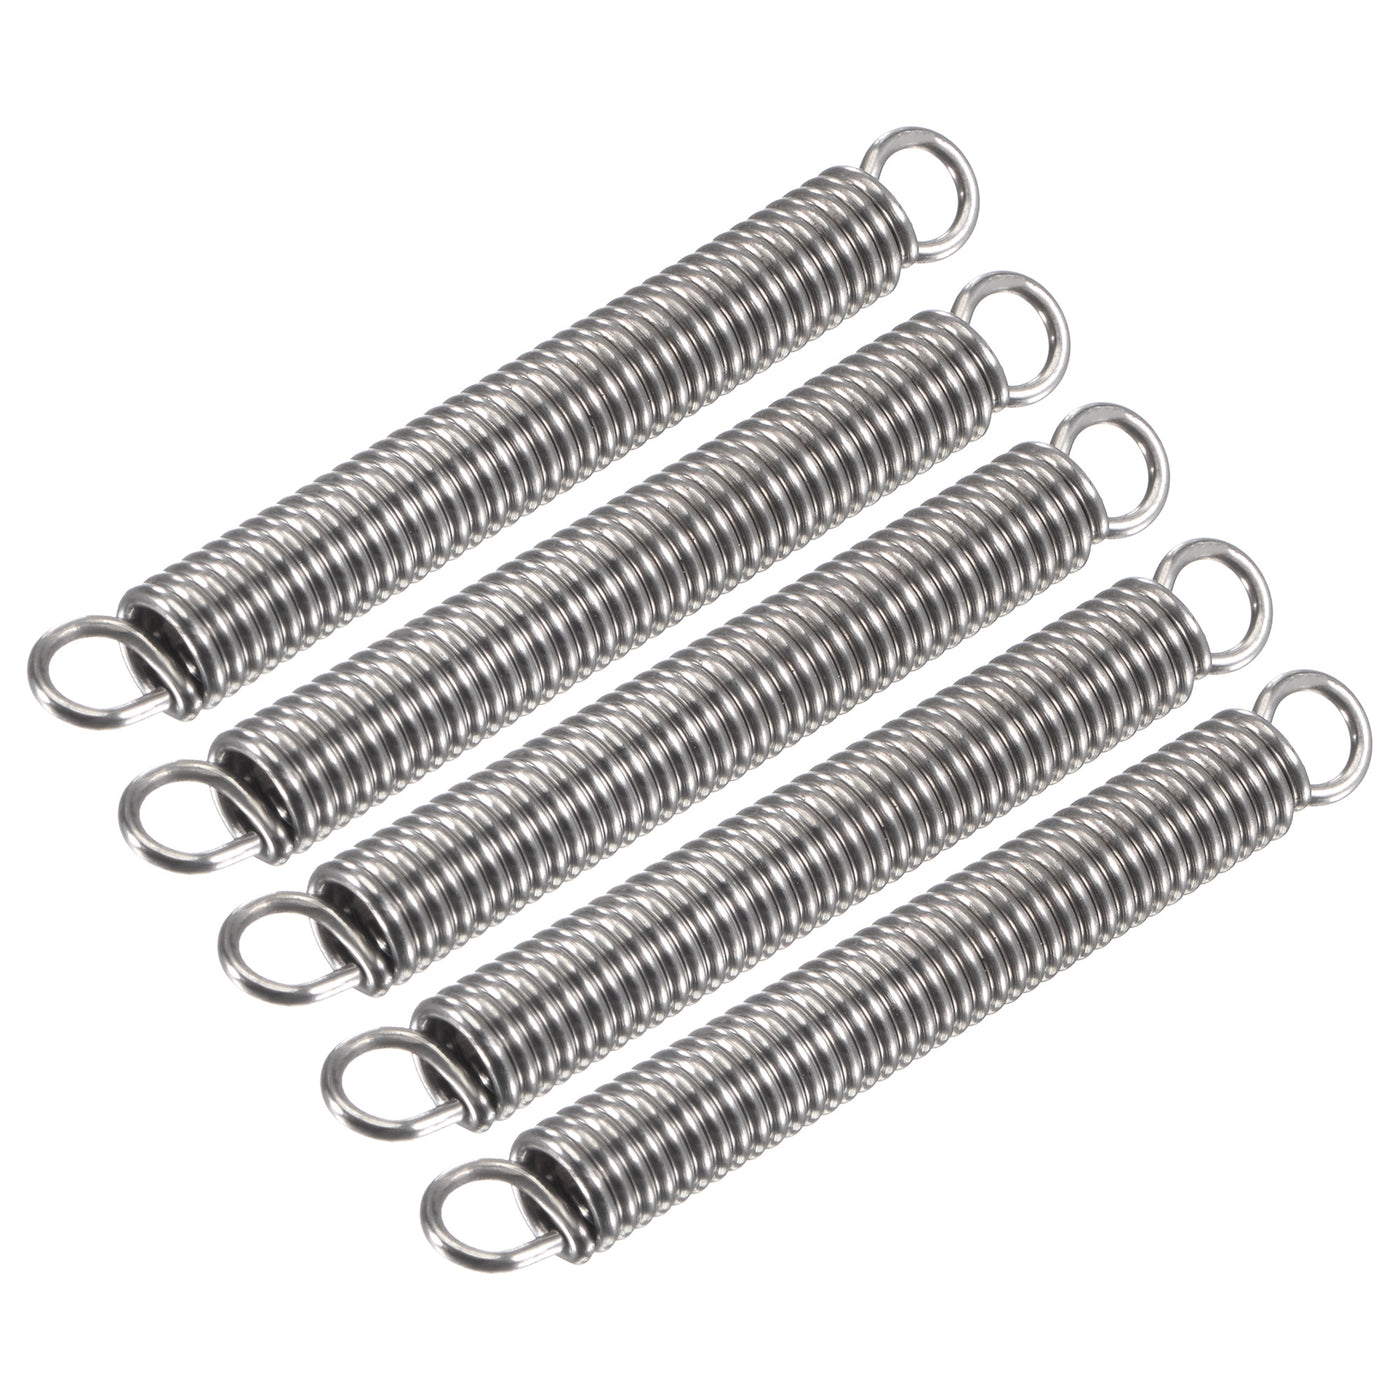 Uxcell Uxcell 1mmx6mmx50mm Extended Compression Spring,5.3Lbs Load Capacity,Silver,5pcs